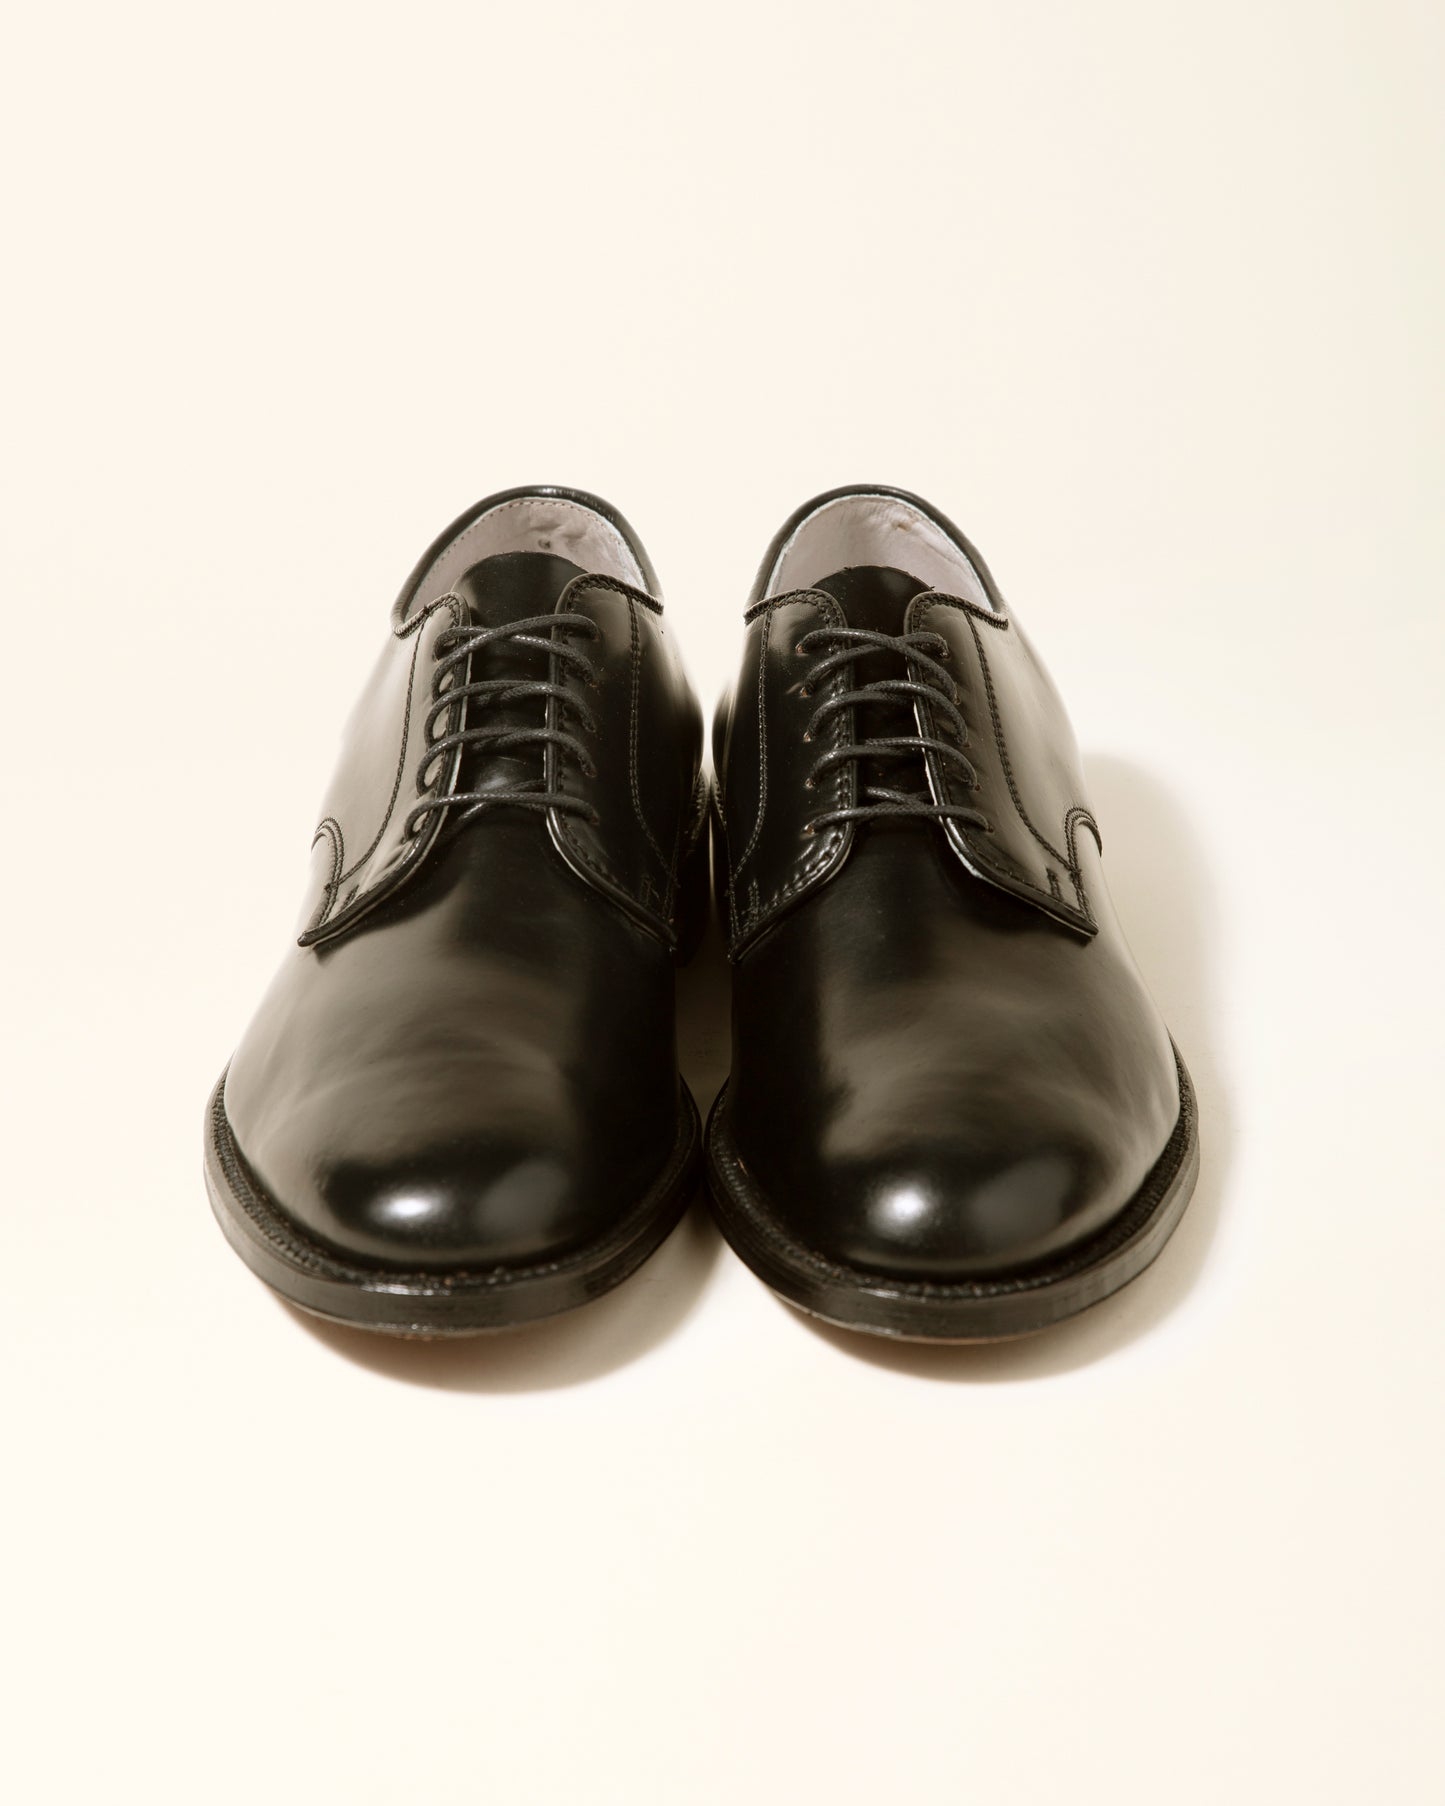 "Victory Heights" Unlined Plain Toe Dover in Black Shell Cordovan, Barrie Last